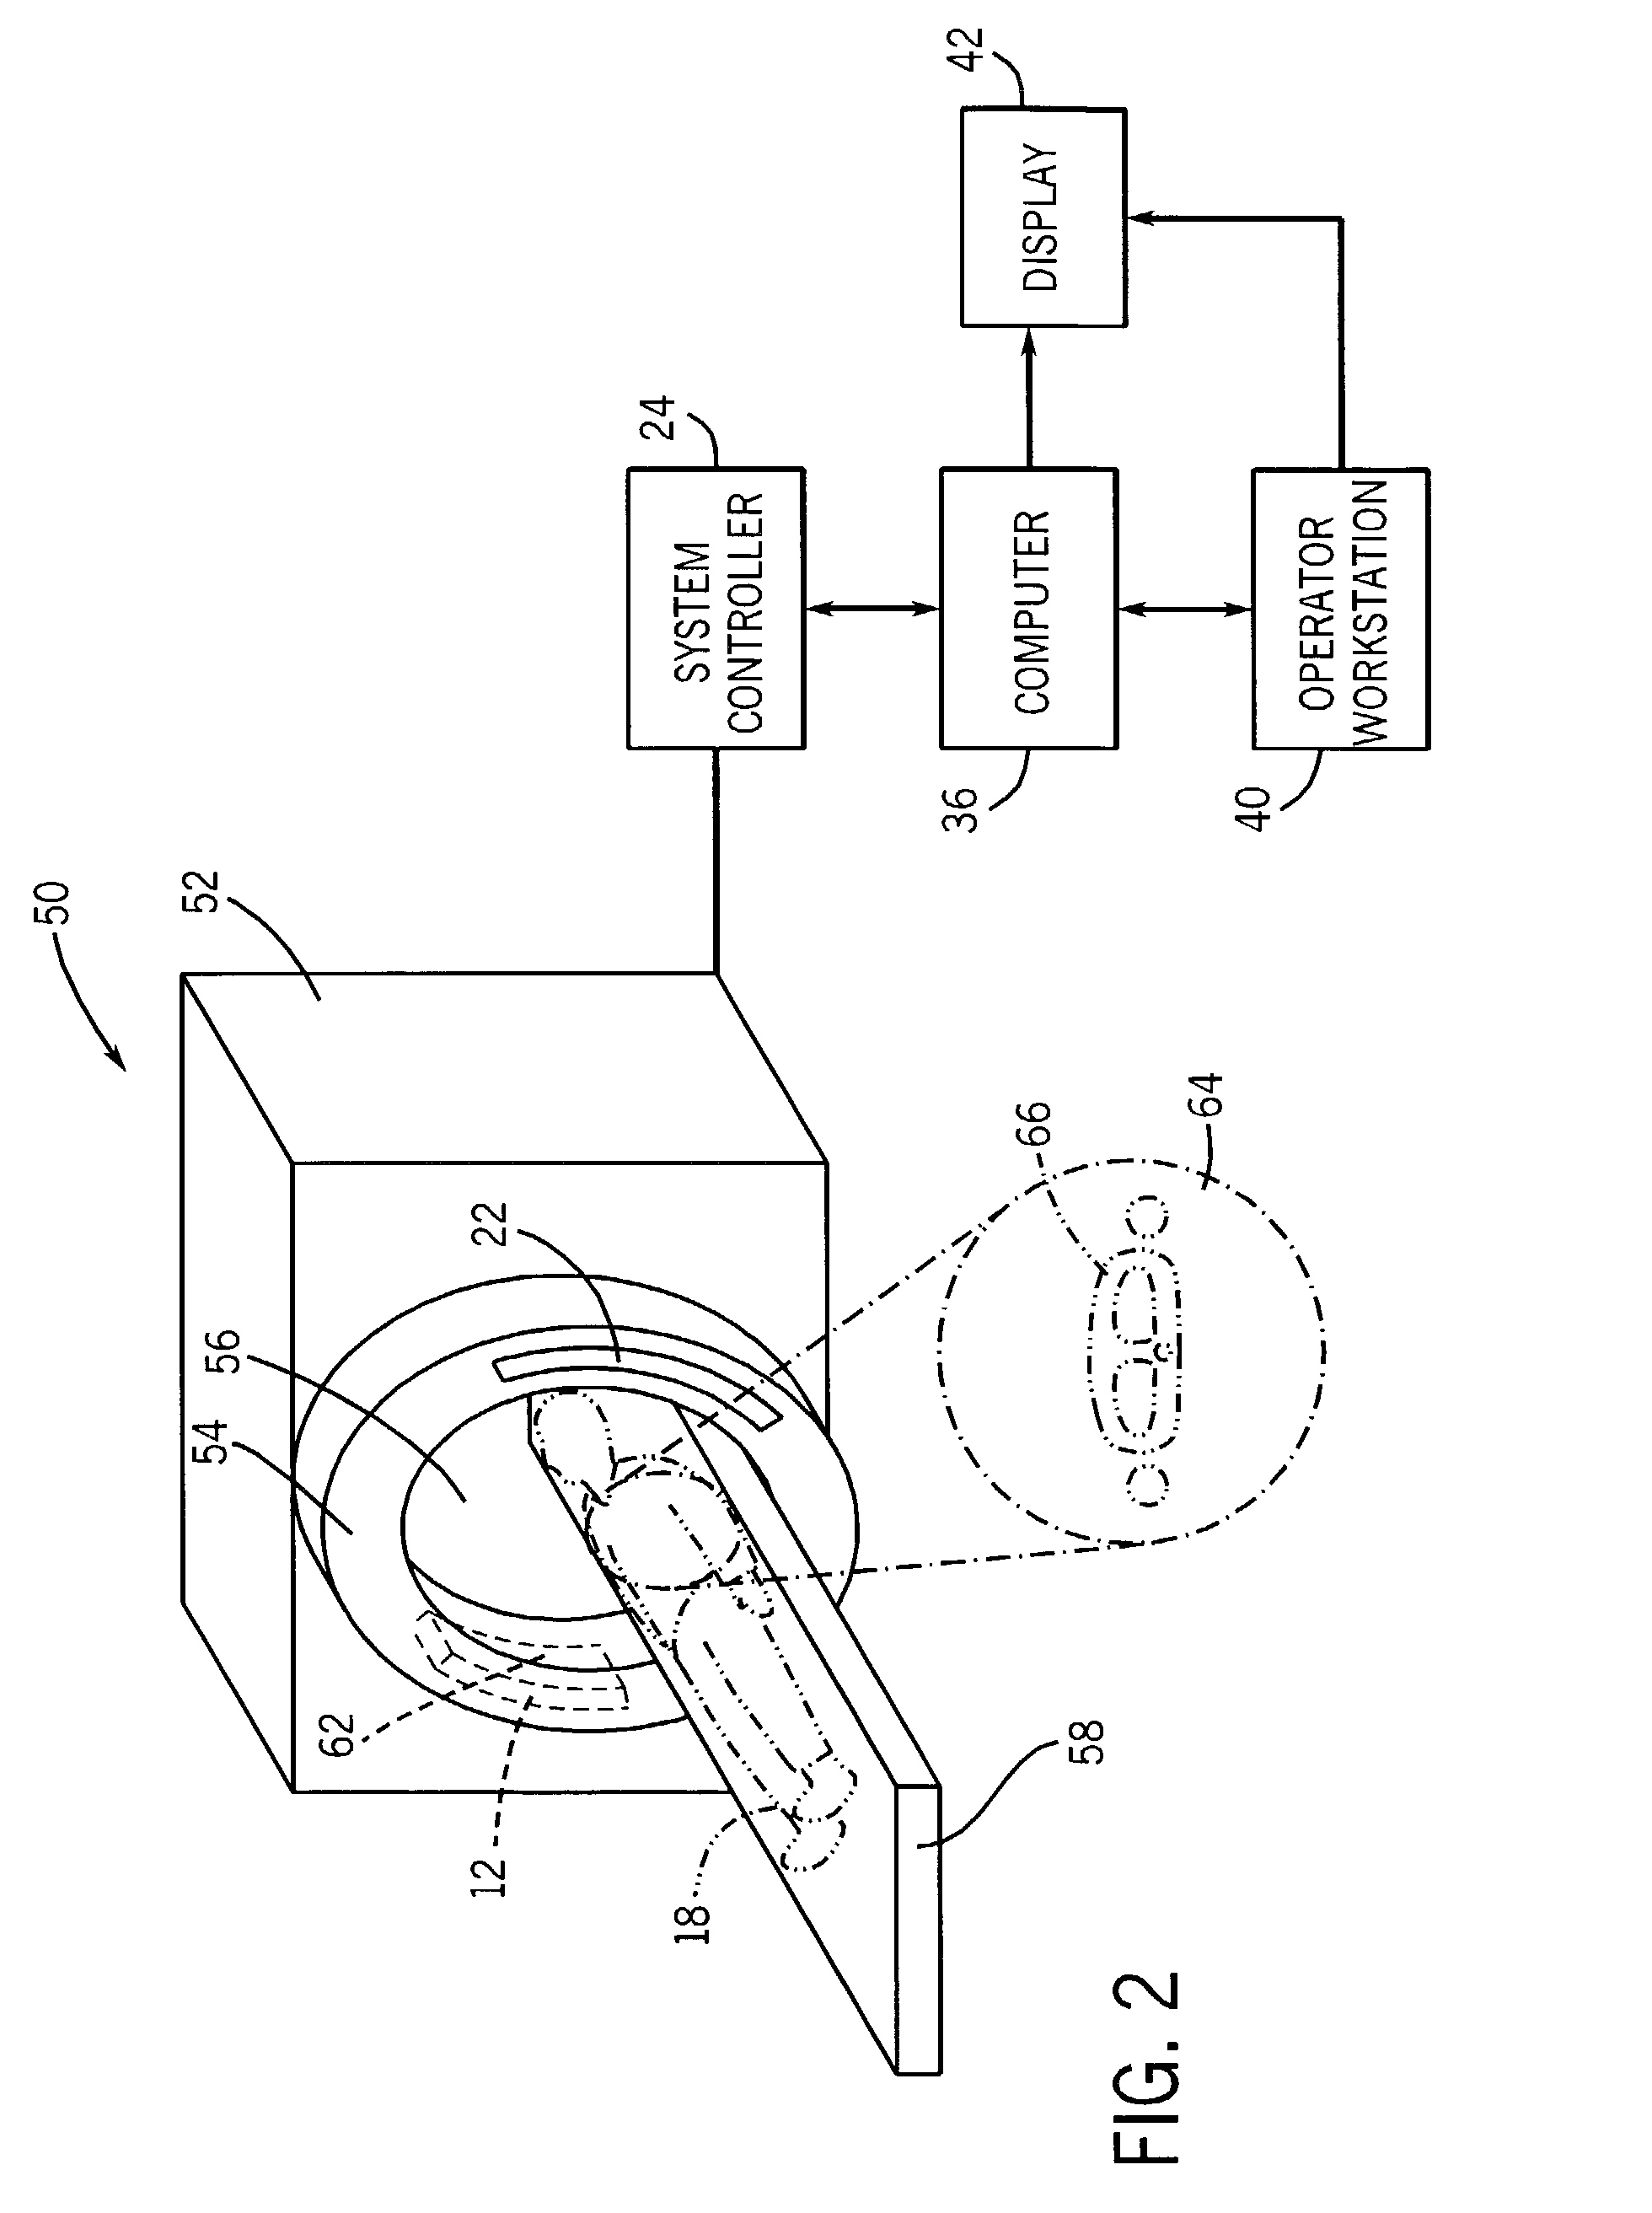 Method and apparatus for removing obstructing structures in CT imaging